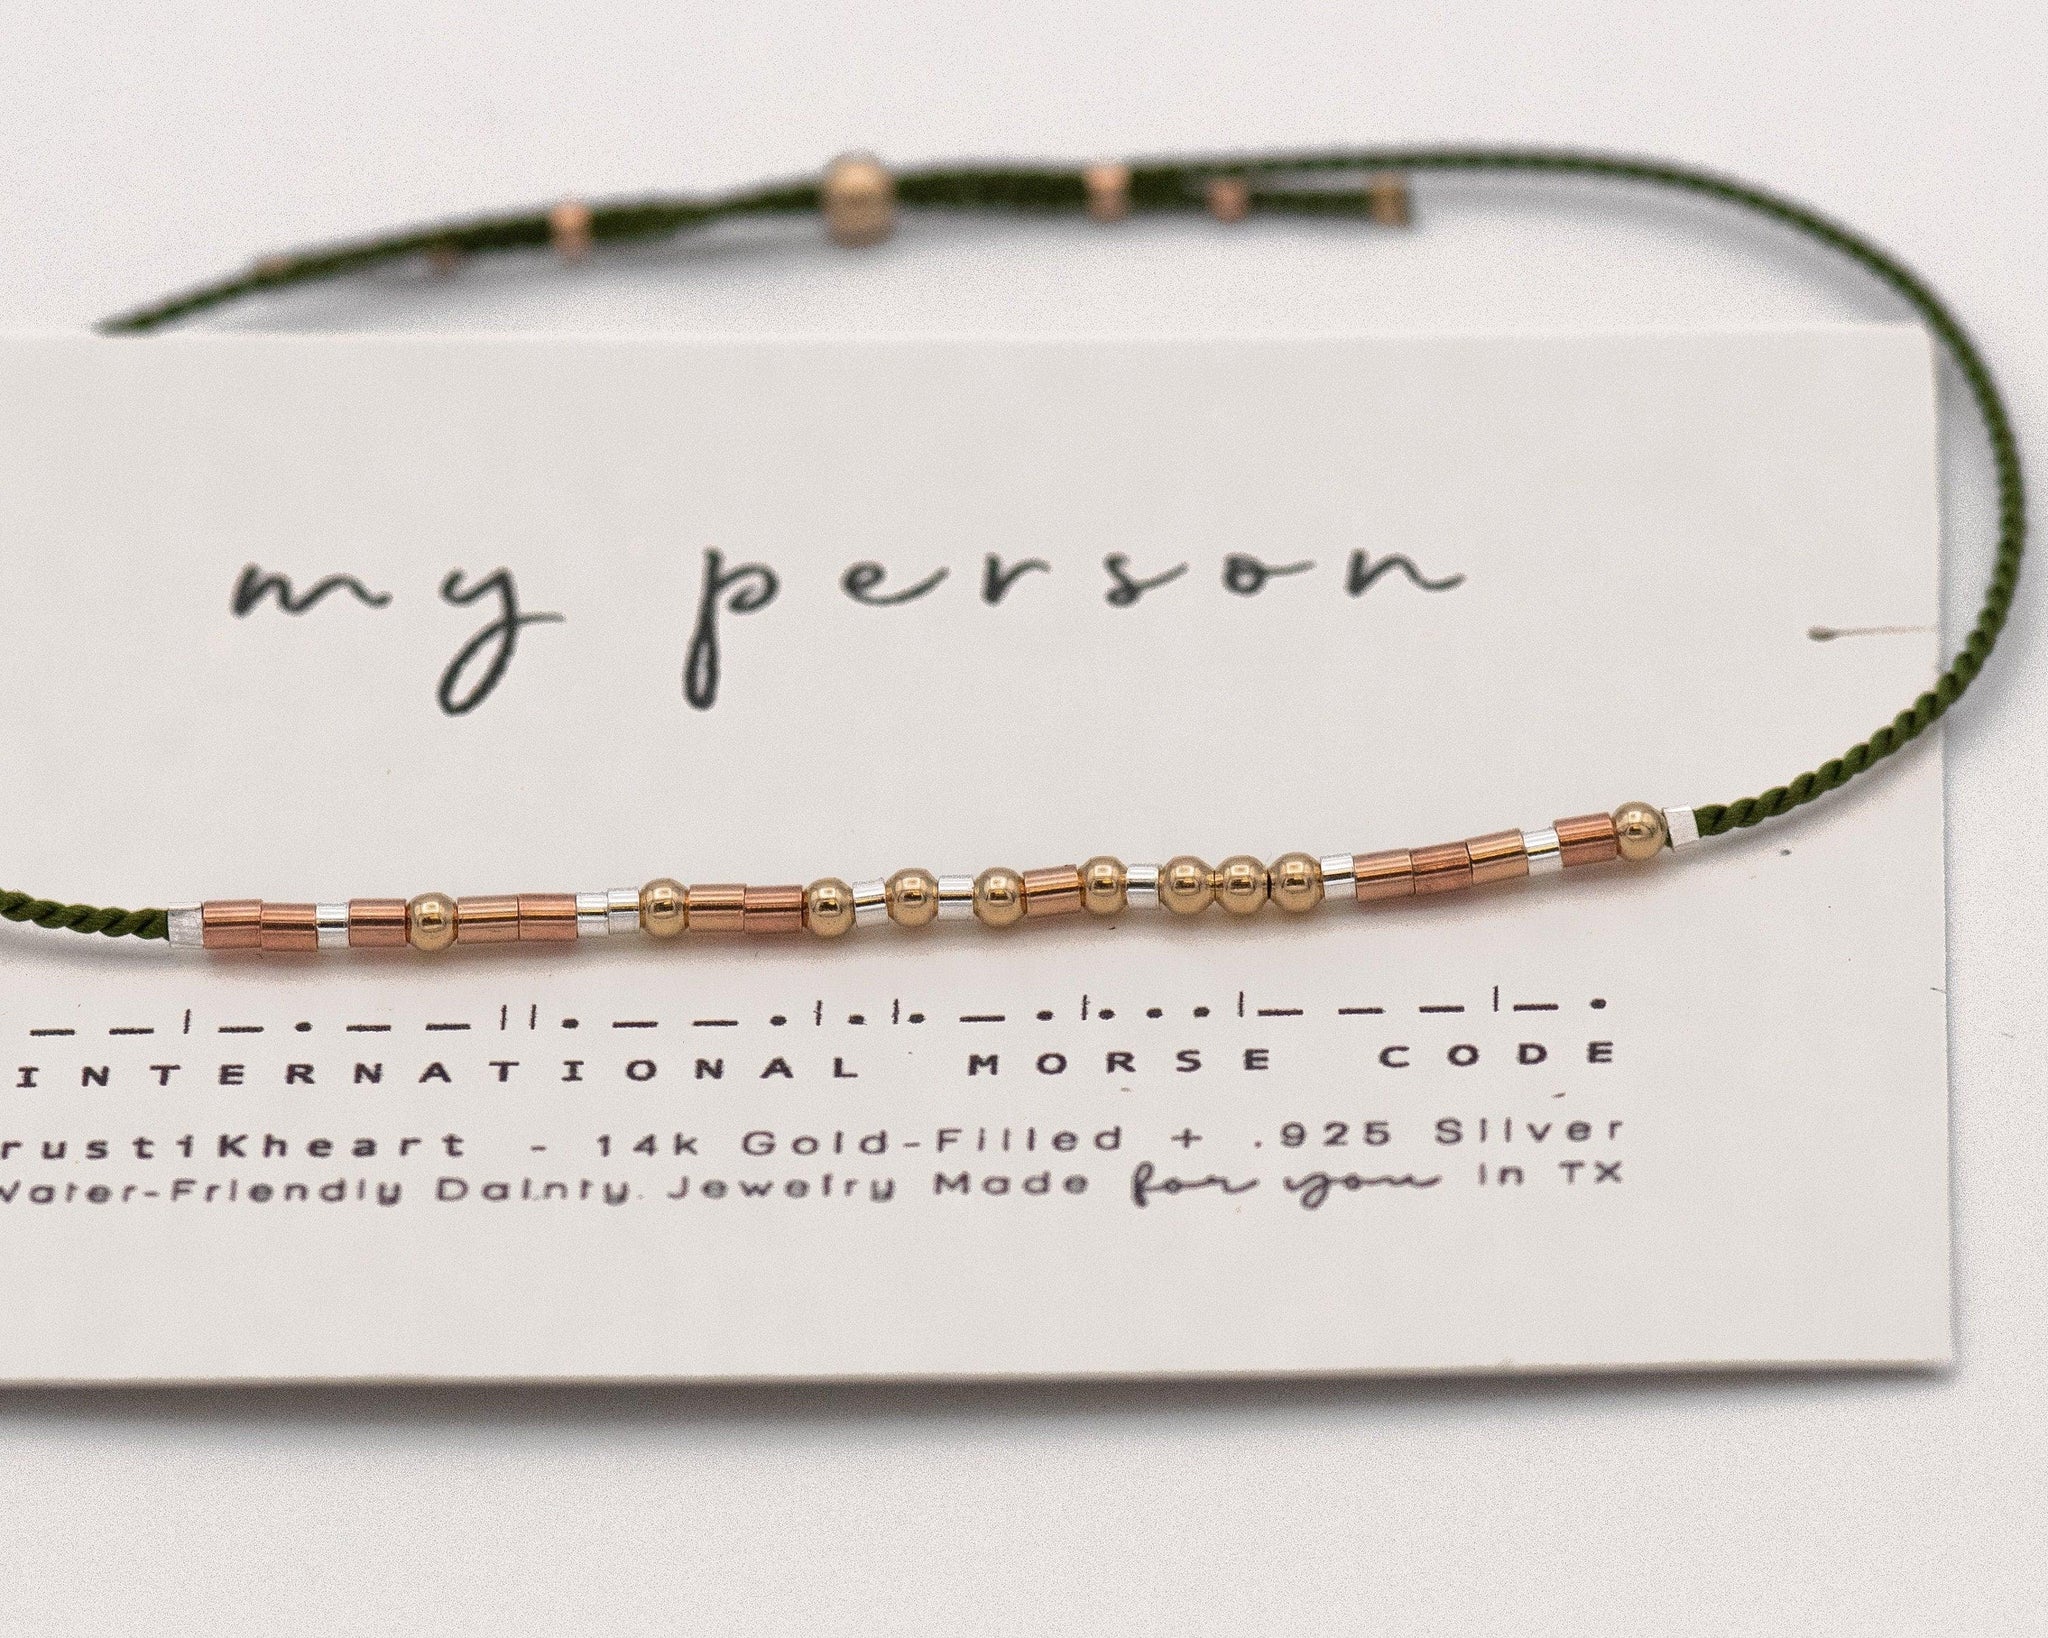 My Person Morse Code Bracelet - YS.RST.S1 - Morse and Dainty